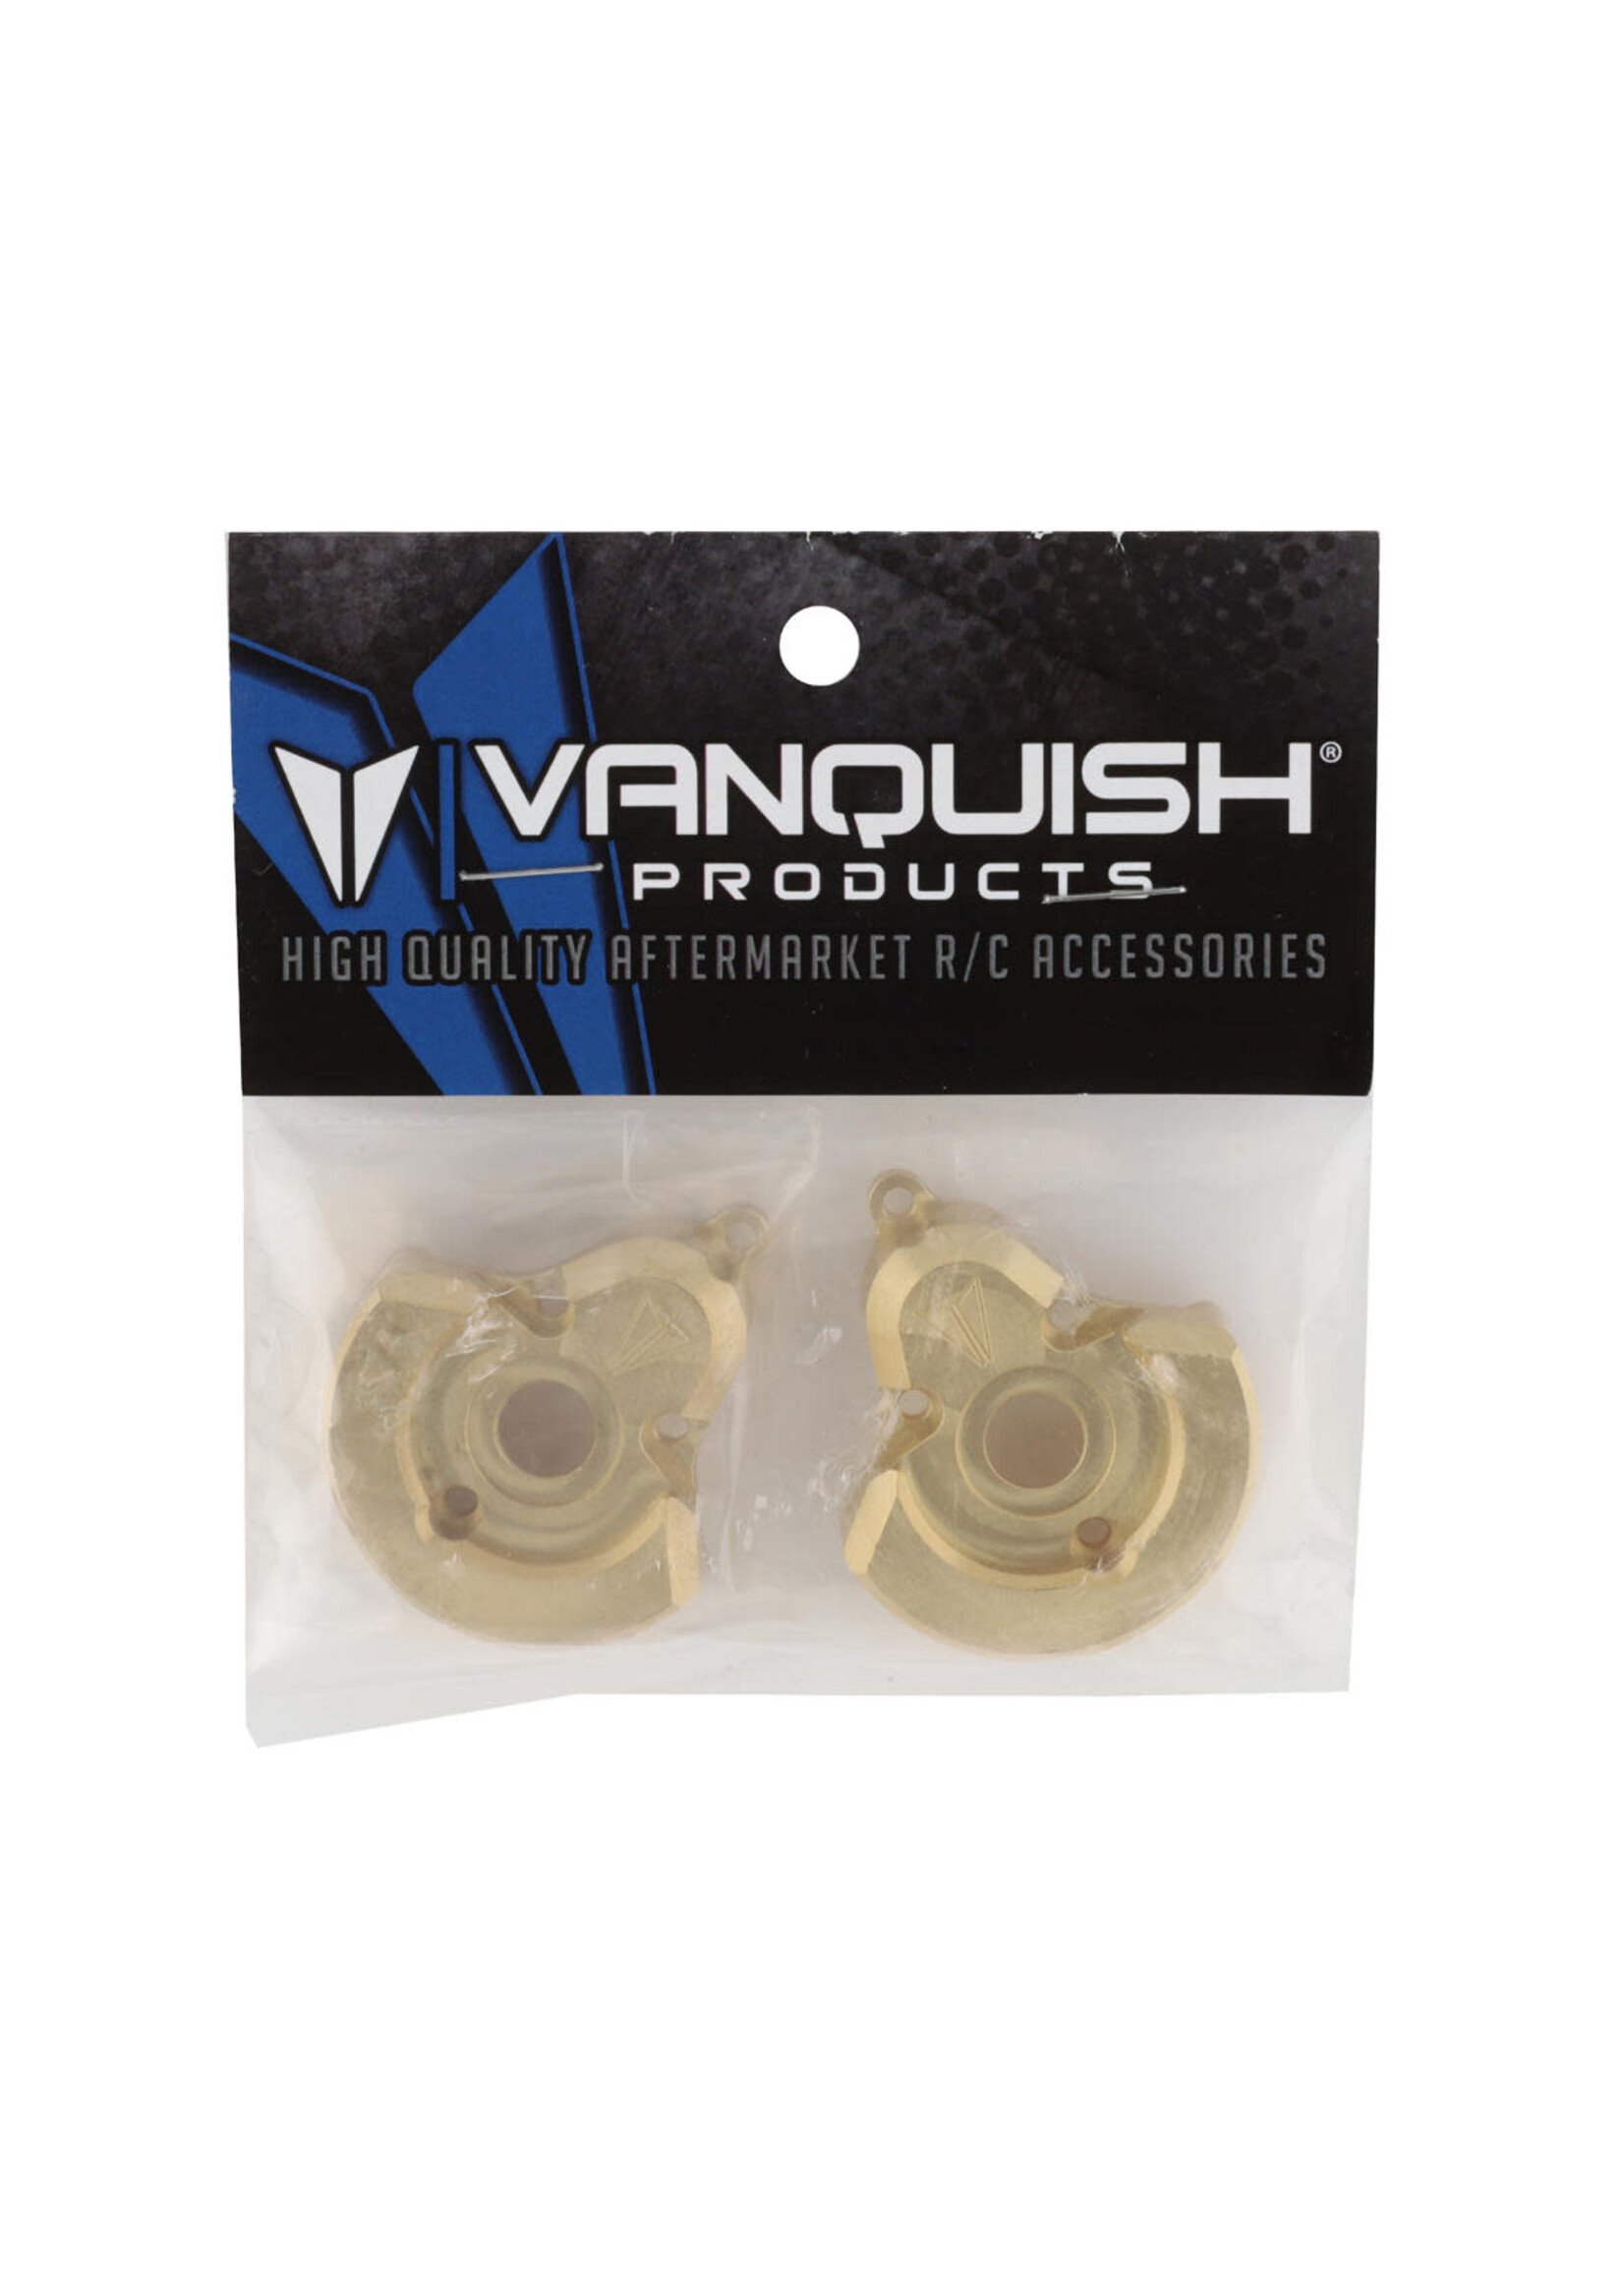 Vanquish VPS08651 Vanquish Products F10 Brass Rear Portal Cover Weights (2) (64.5g)